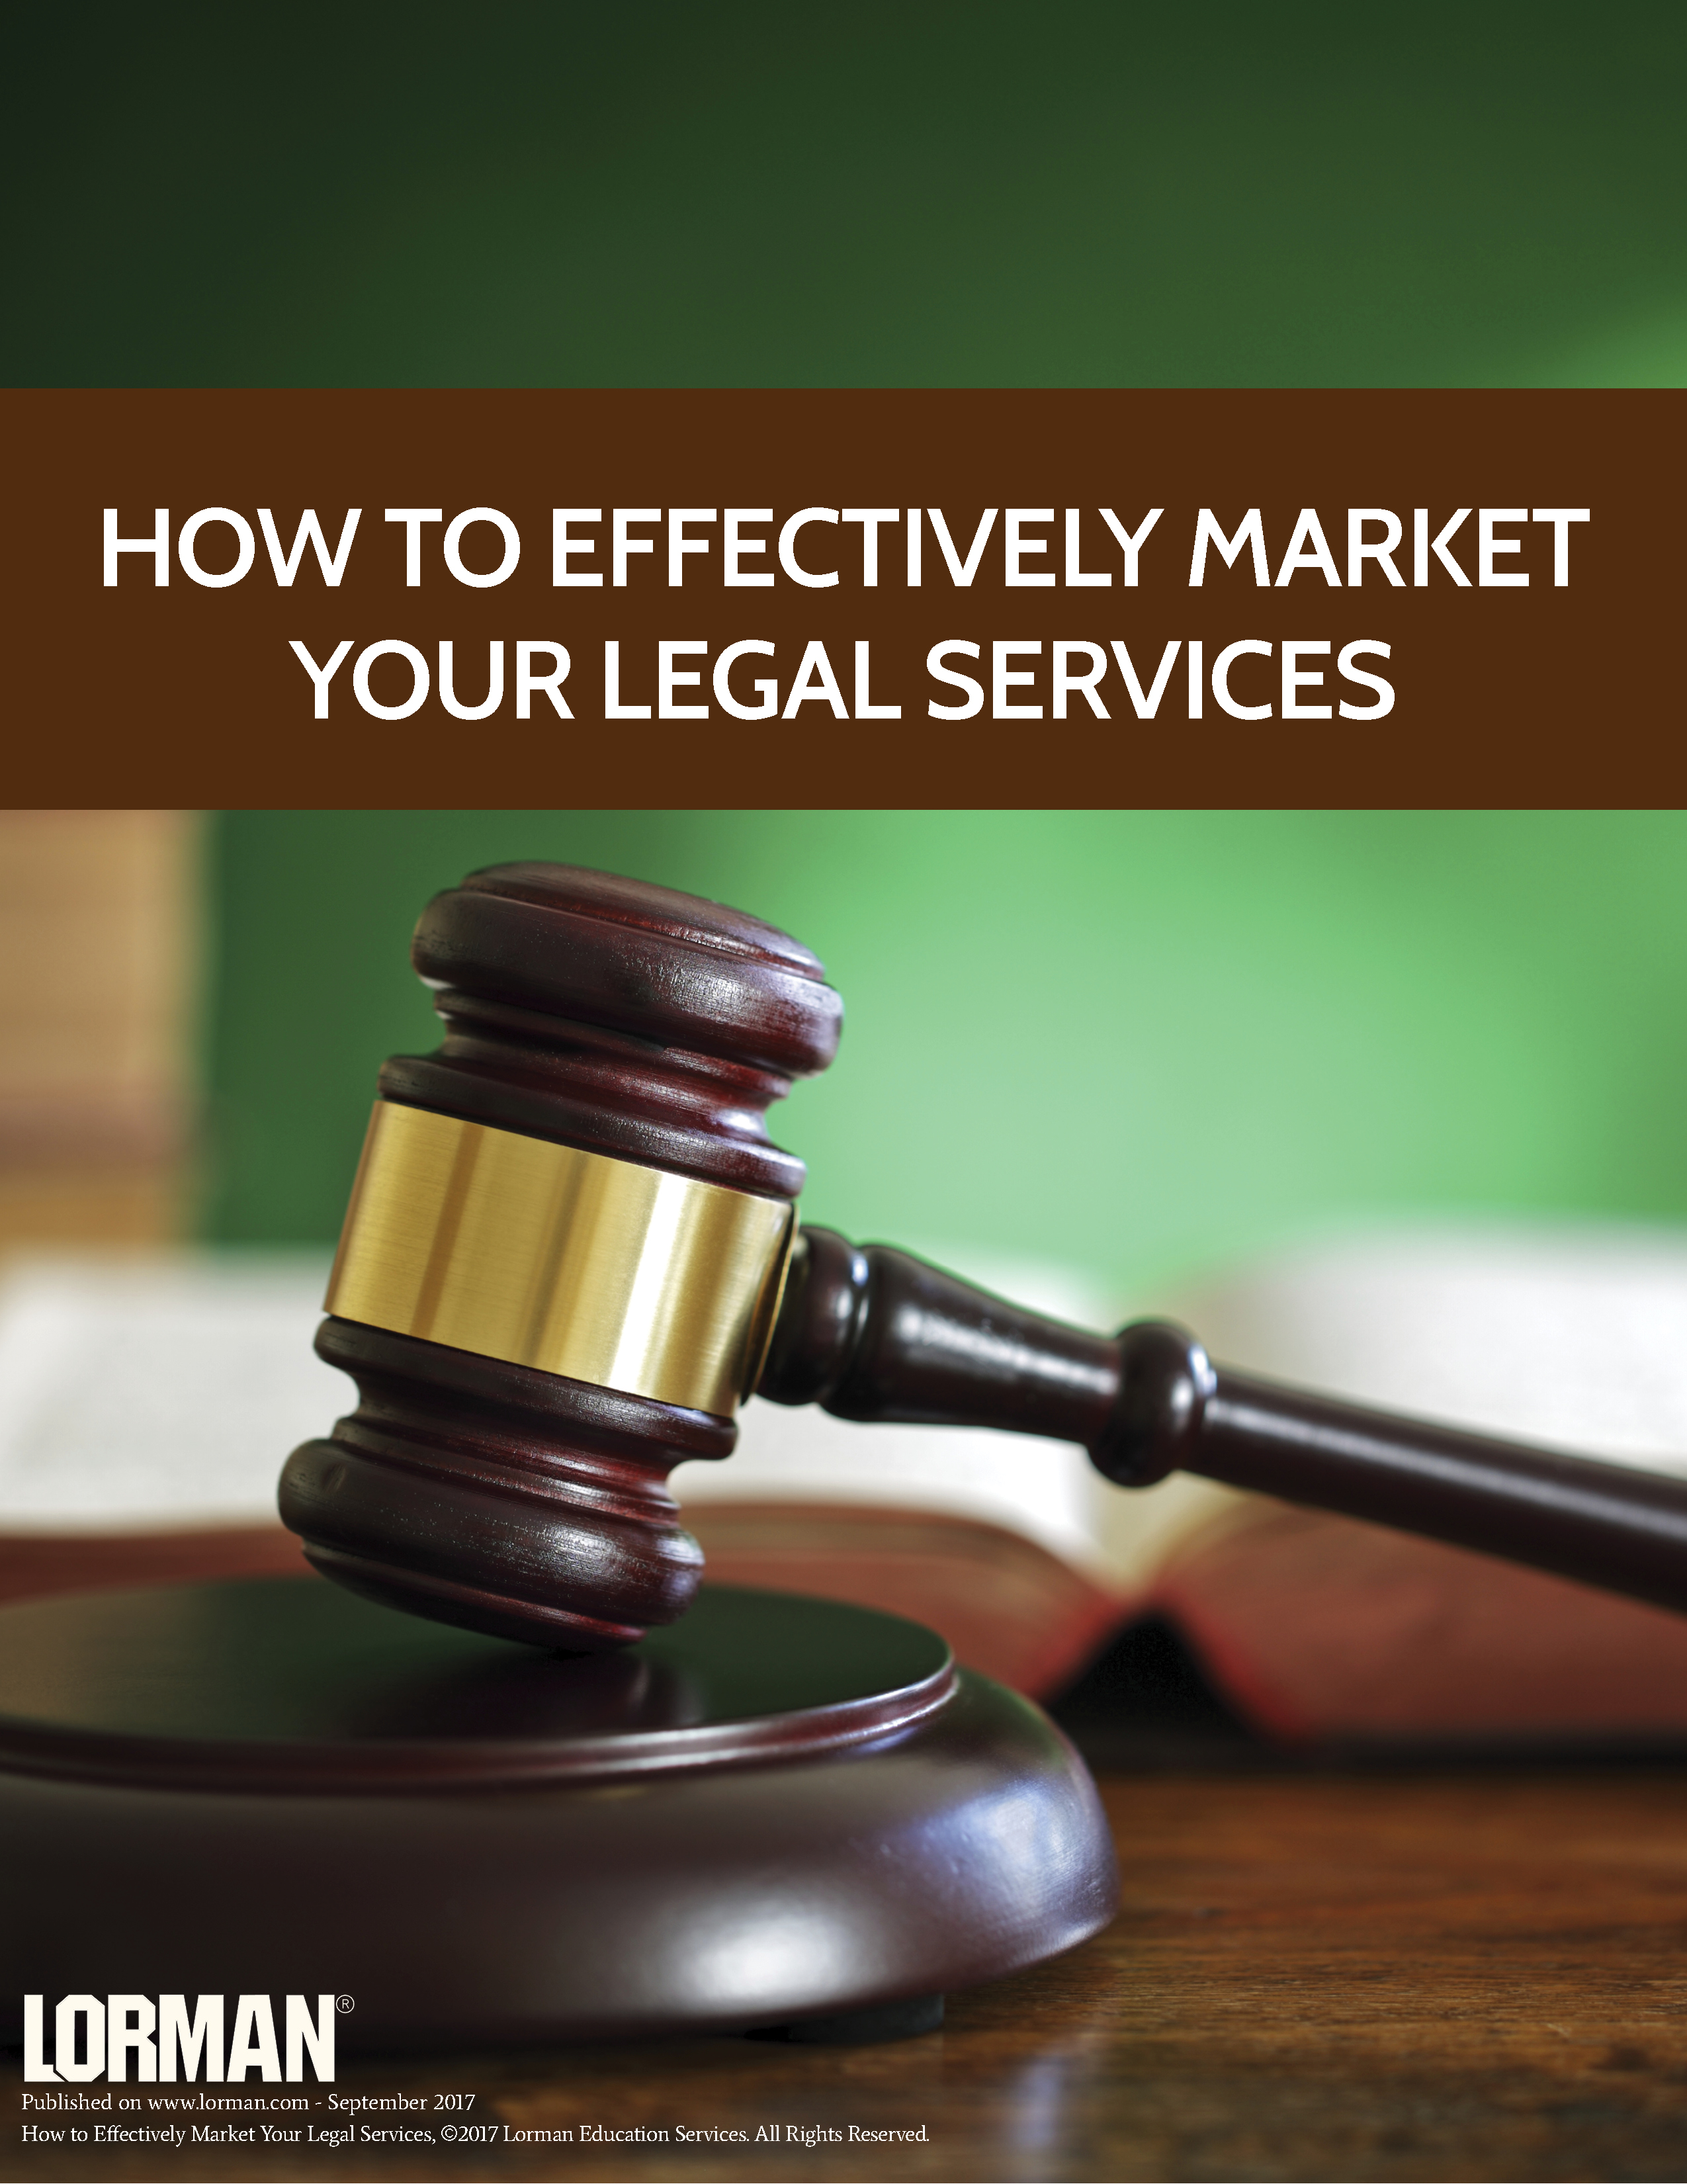 How to Effectively Market Your Legal Services